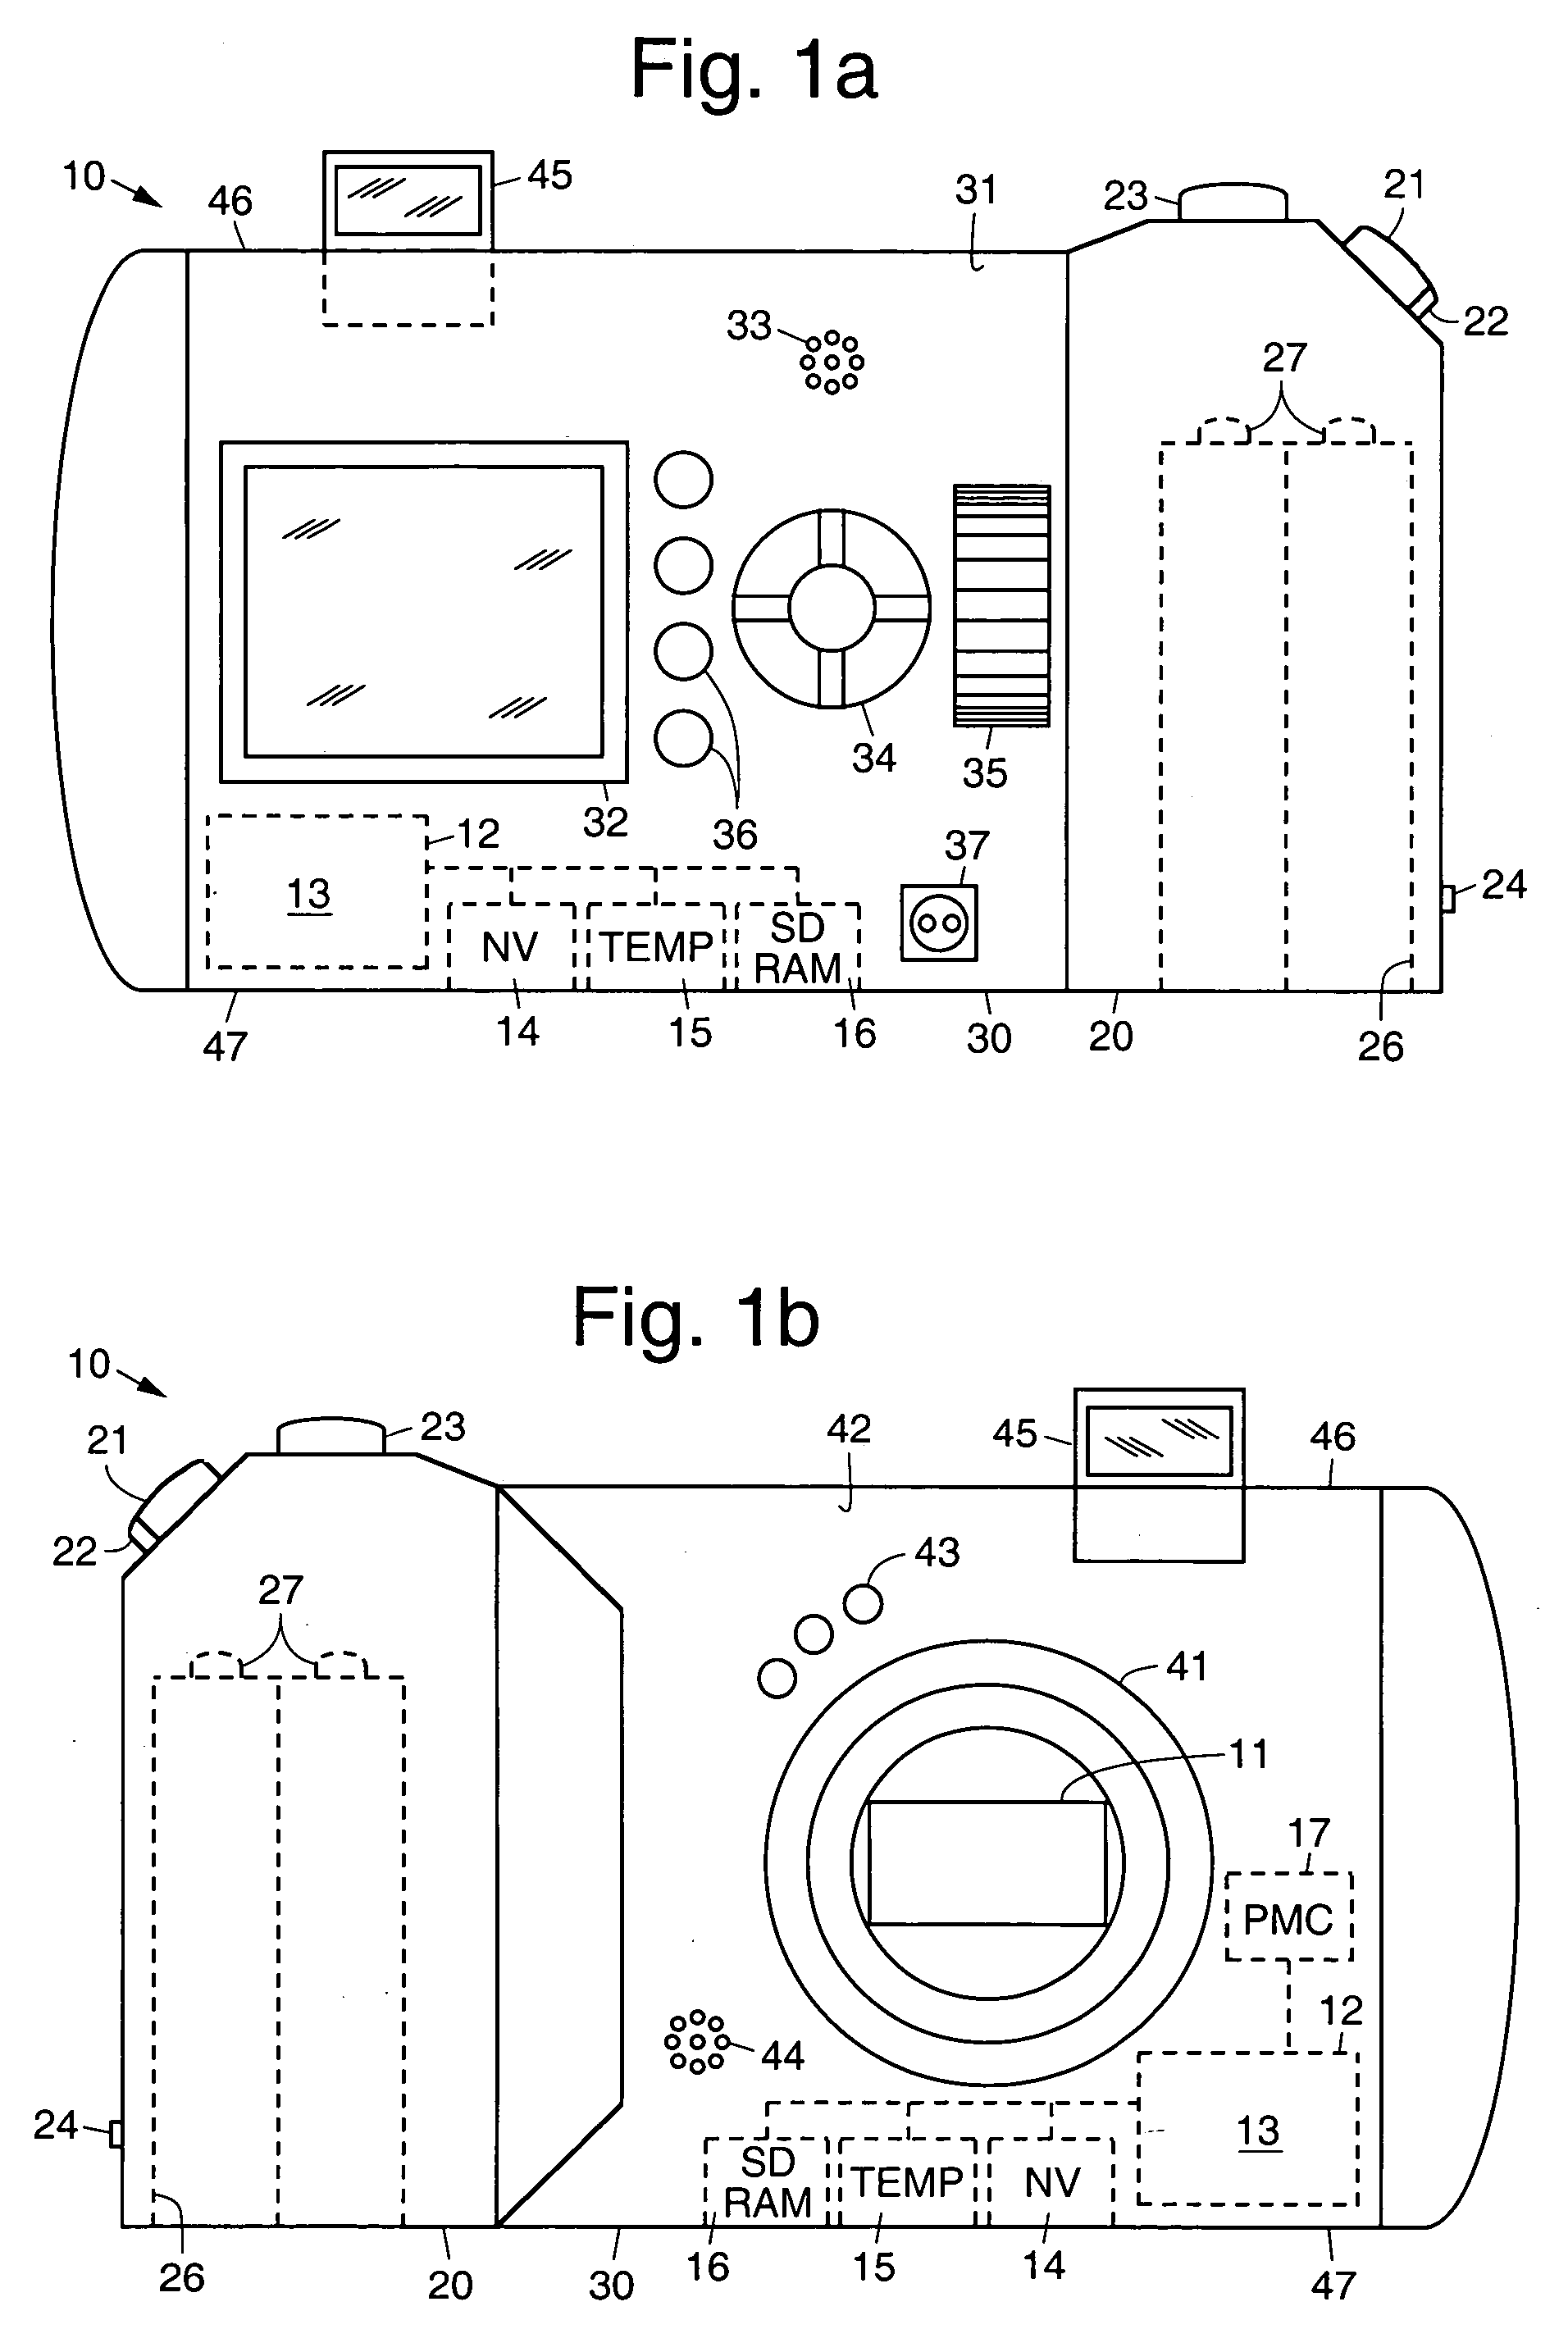 Method for rapid power-on to first picture in a digital camera